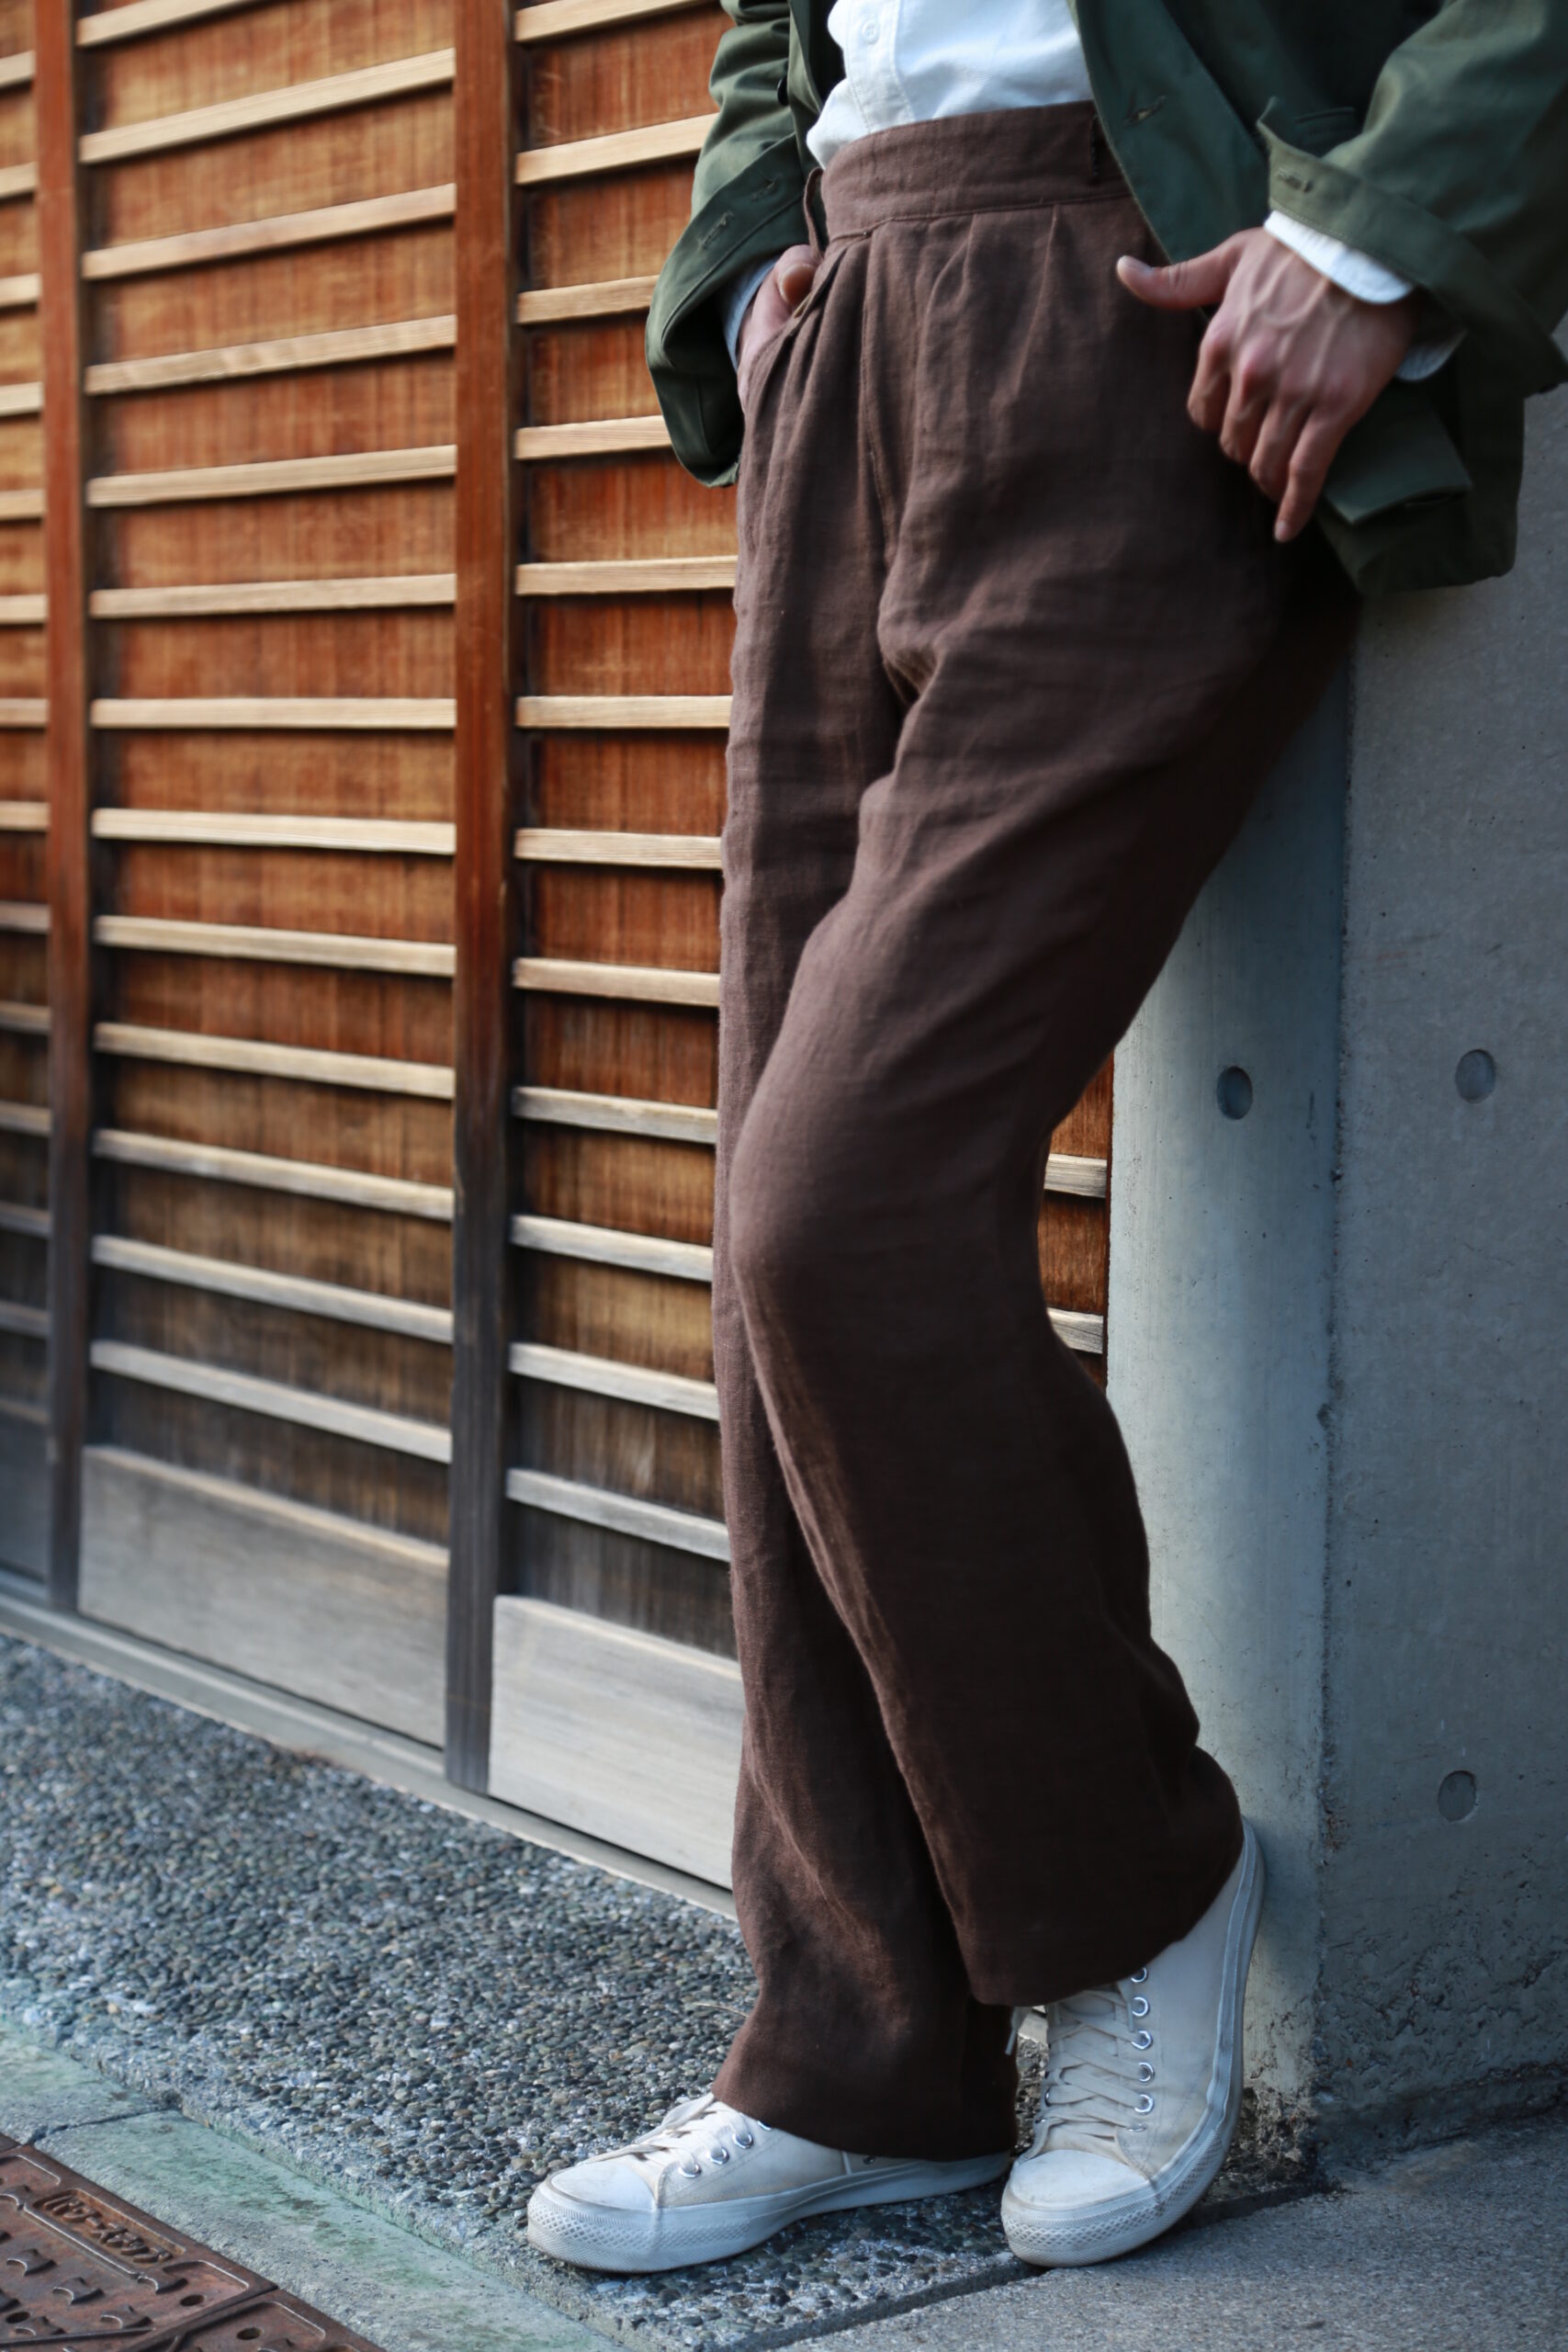 KENNETH FIELD 22ss Arch GRY Hopsack 2P 33 ウール ボトム TROUSER Canonico